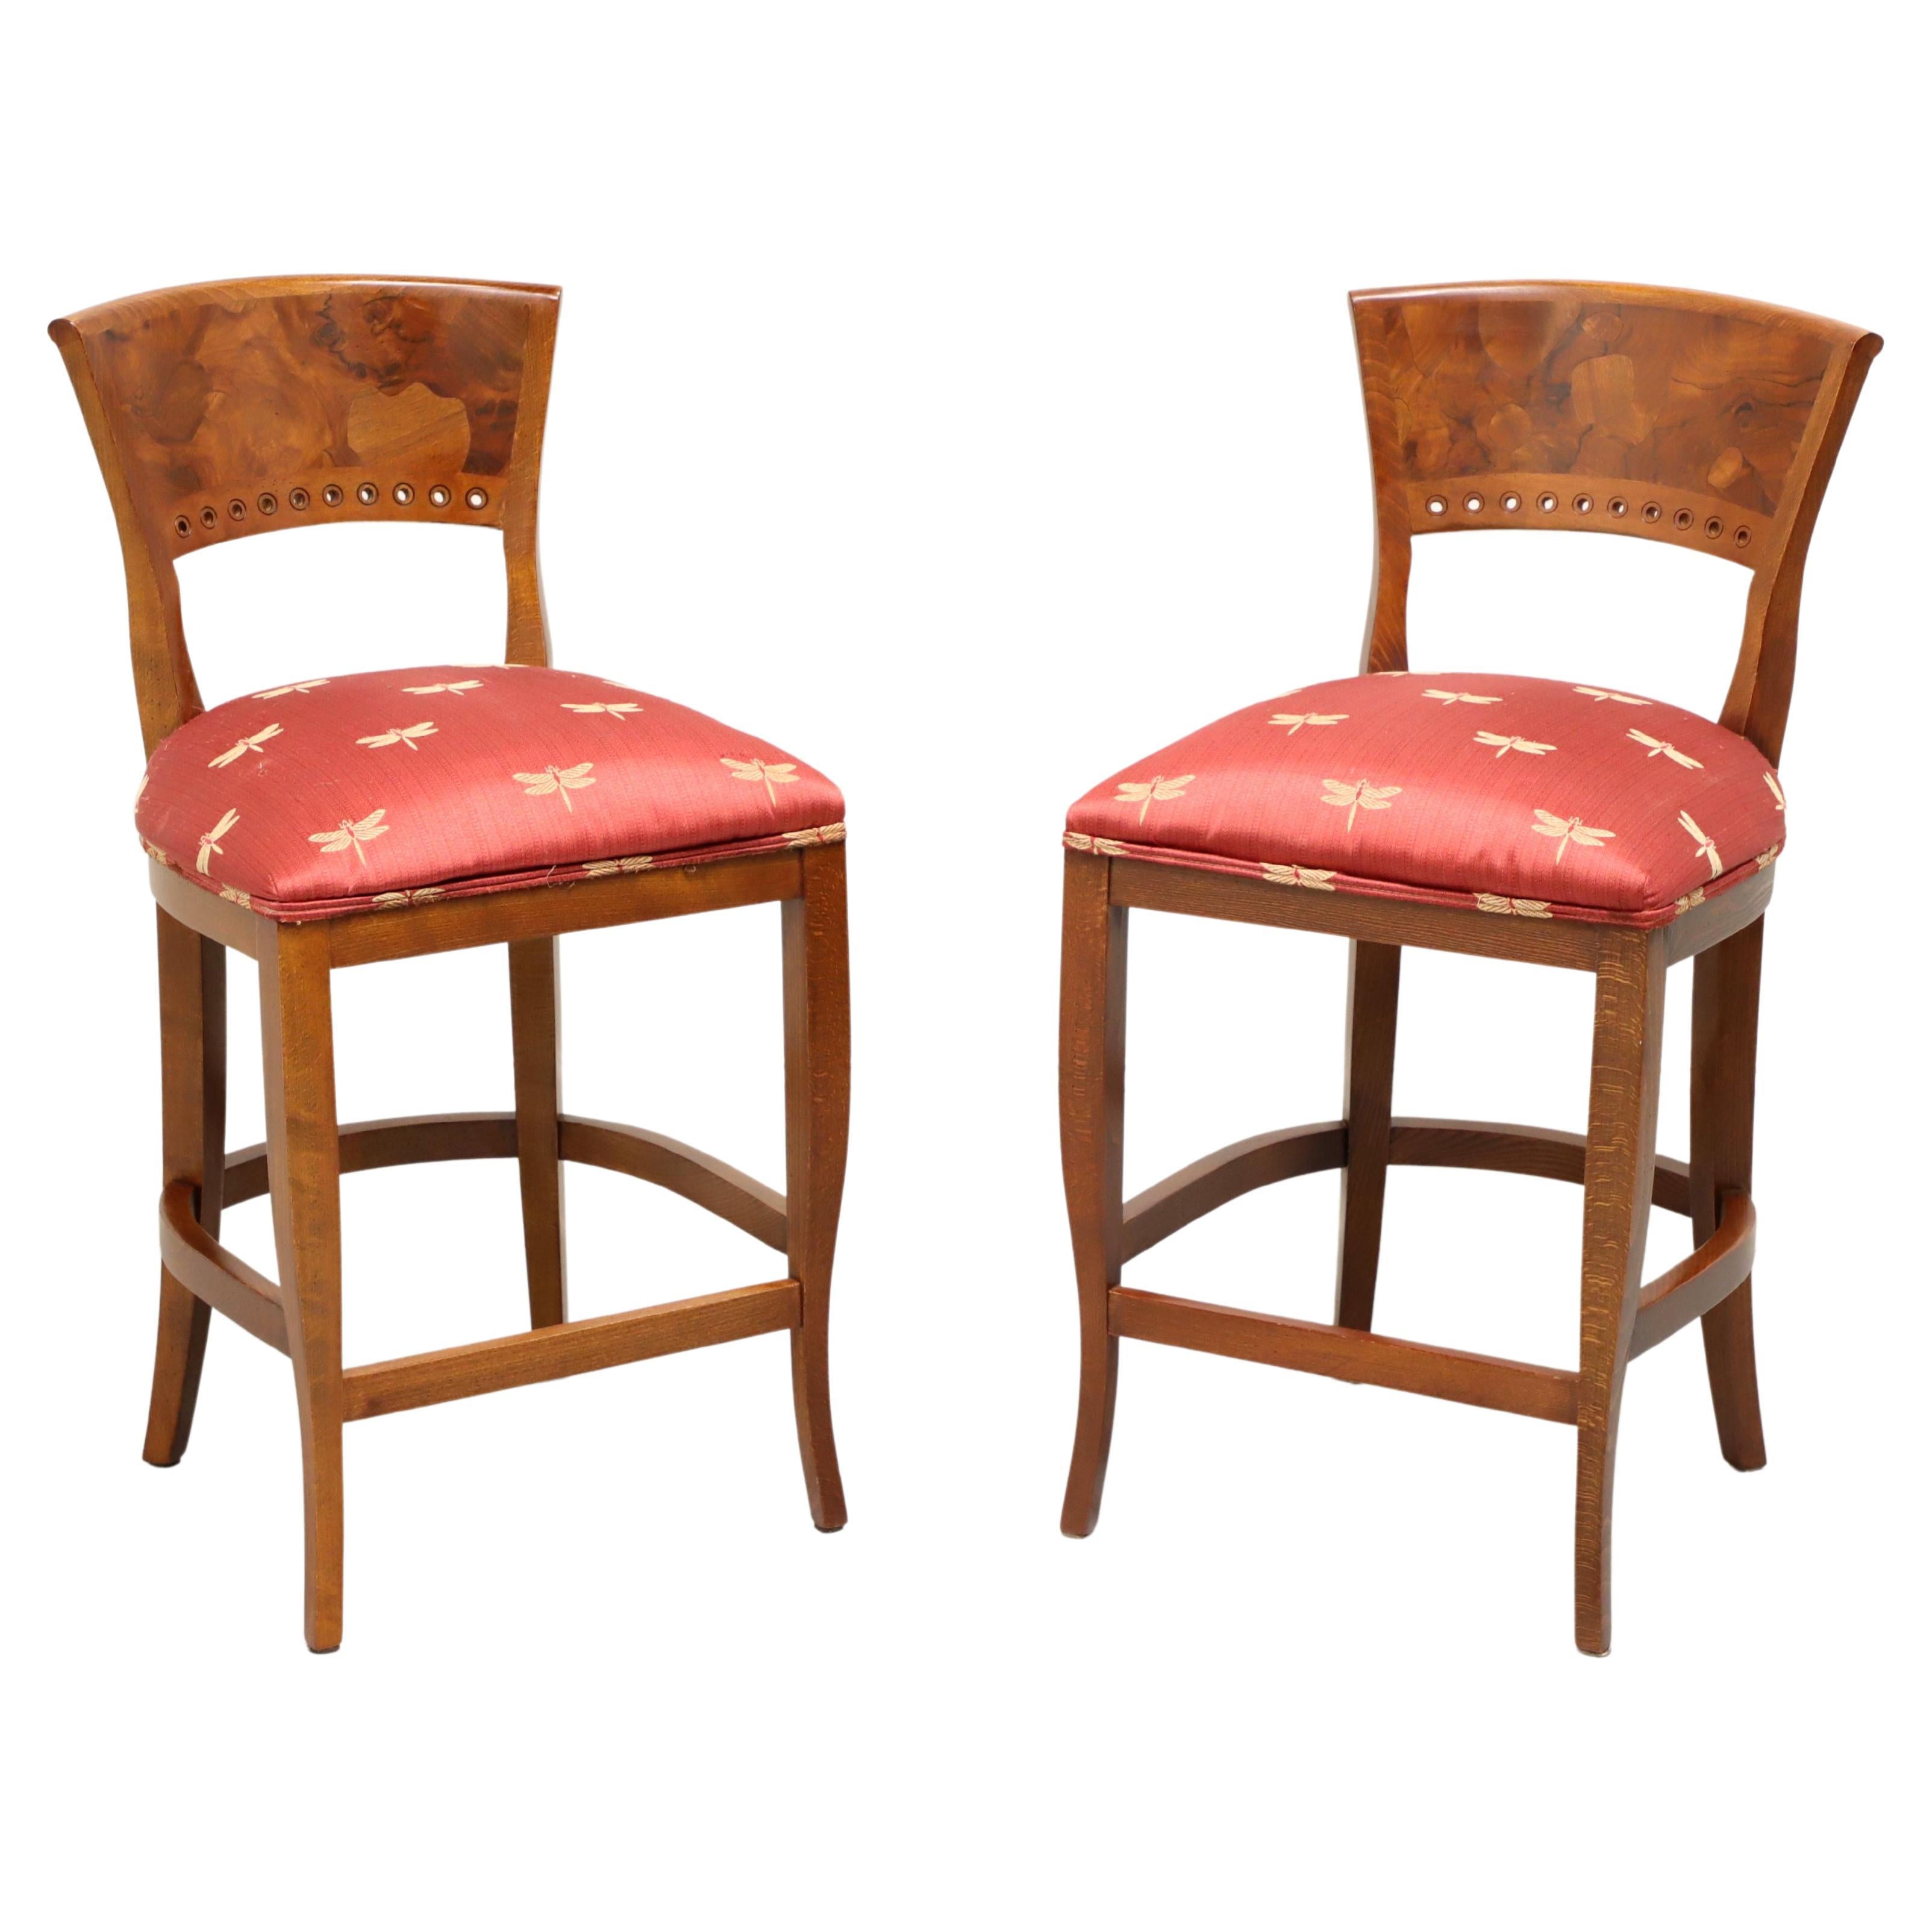 Tiger & Burl Oak Counter Height Stools by EMERSON ET CIE - Pair A